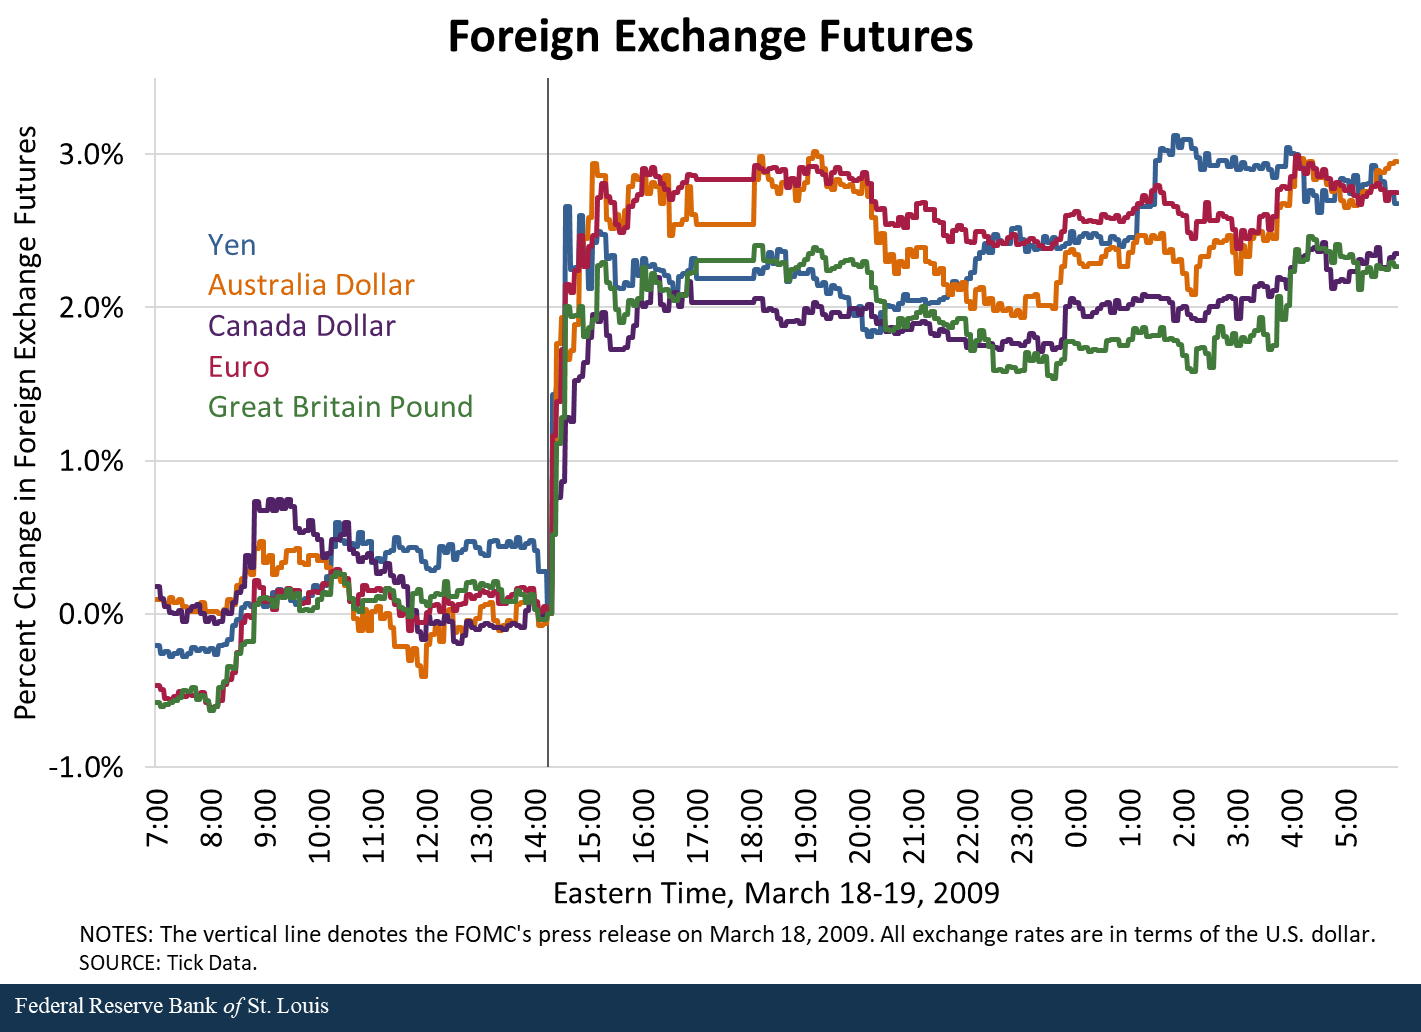 Line charge showing percent change in foreign exchange futures before and after FOMC's March 18, 2019 monetary policy announcement